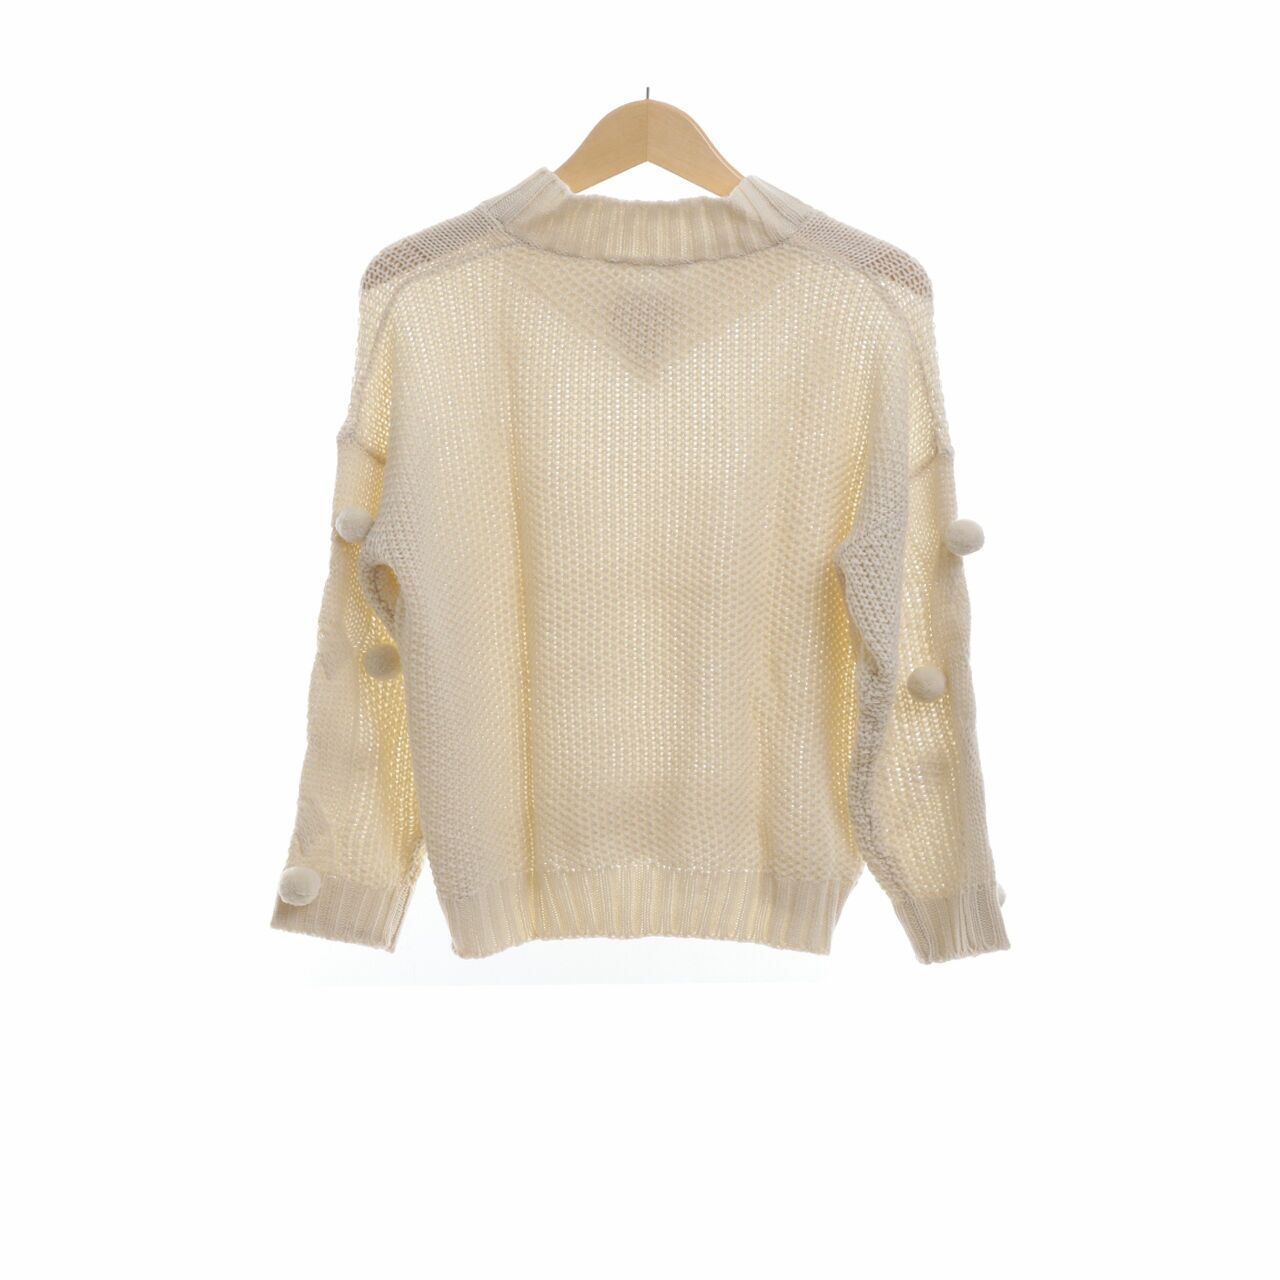 Et Cetera Off White Knit Sweater